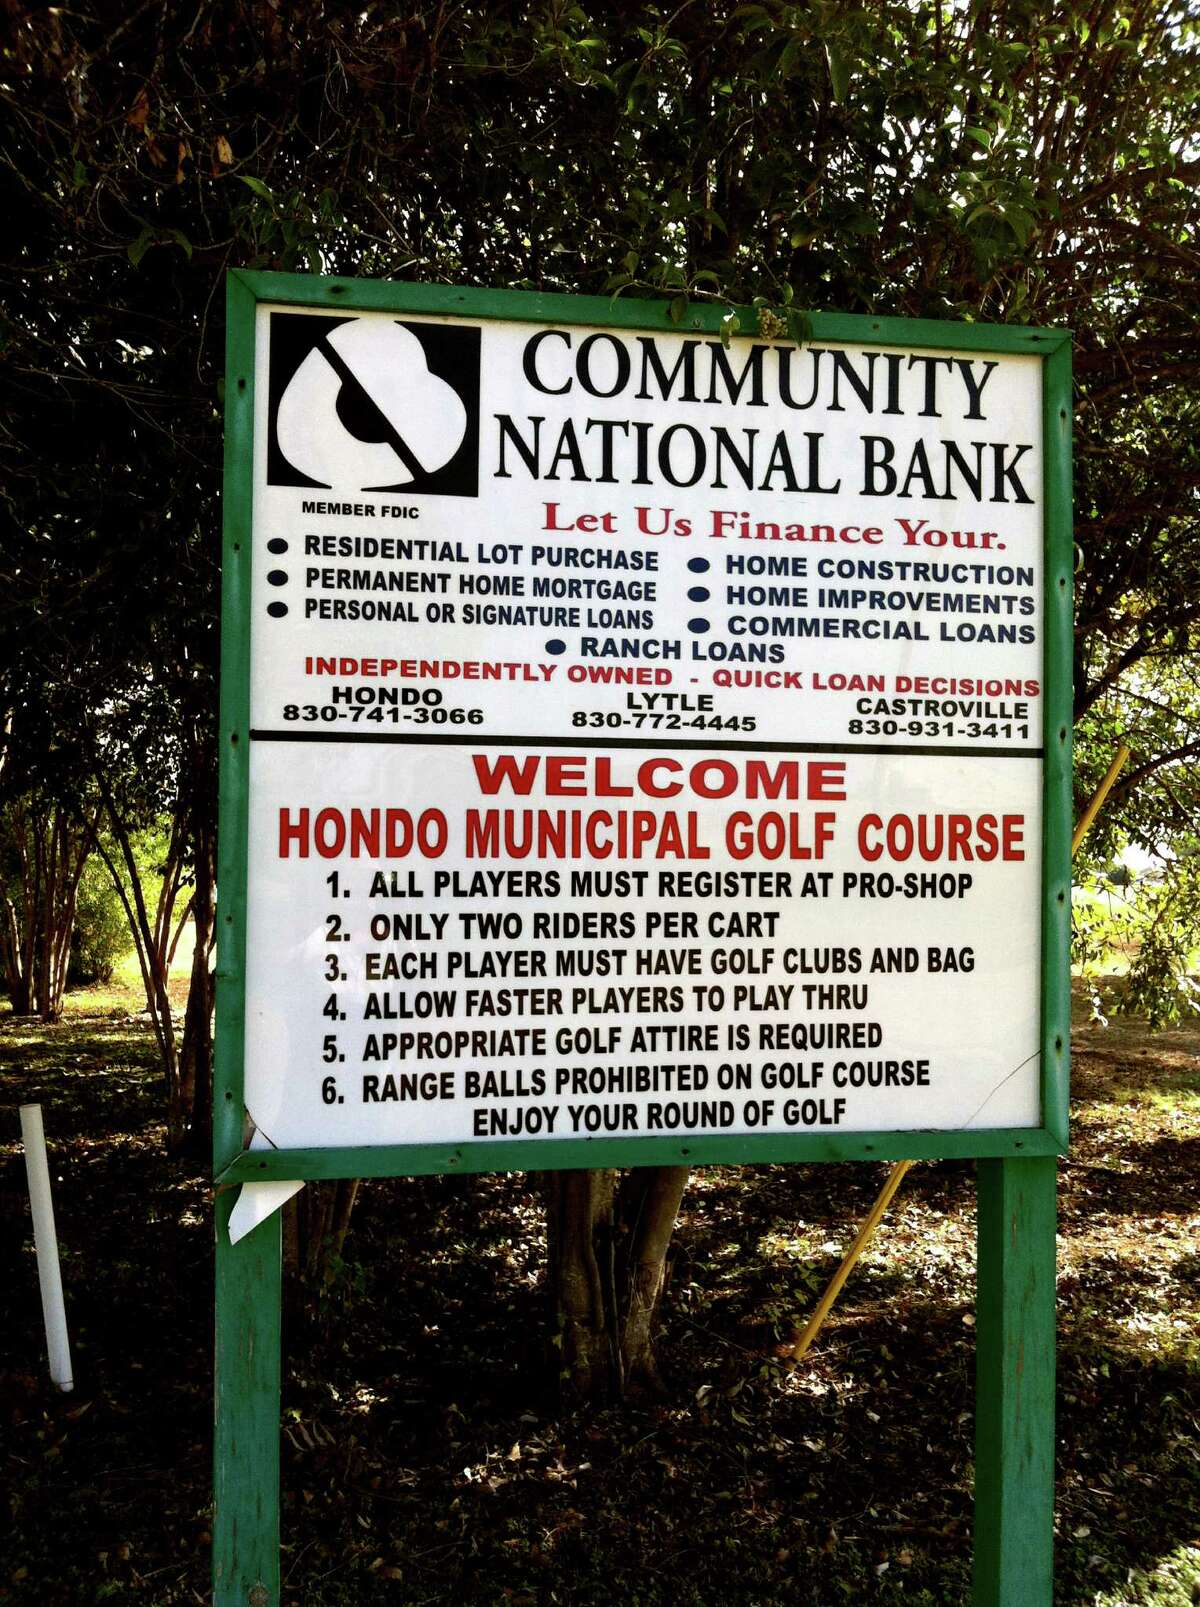 The Hondo Municipal Golf Course is a links-style, small-town nine-hole course that offers a relaxed setting for beginners or those wishing to work on different parts of their game.